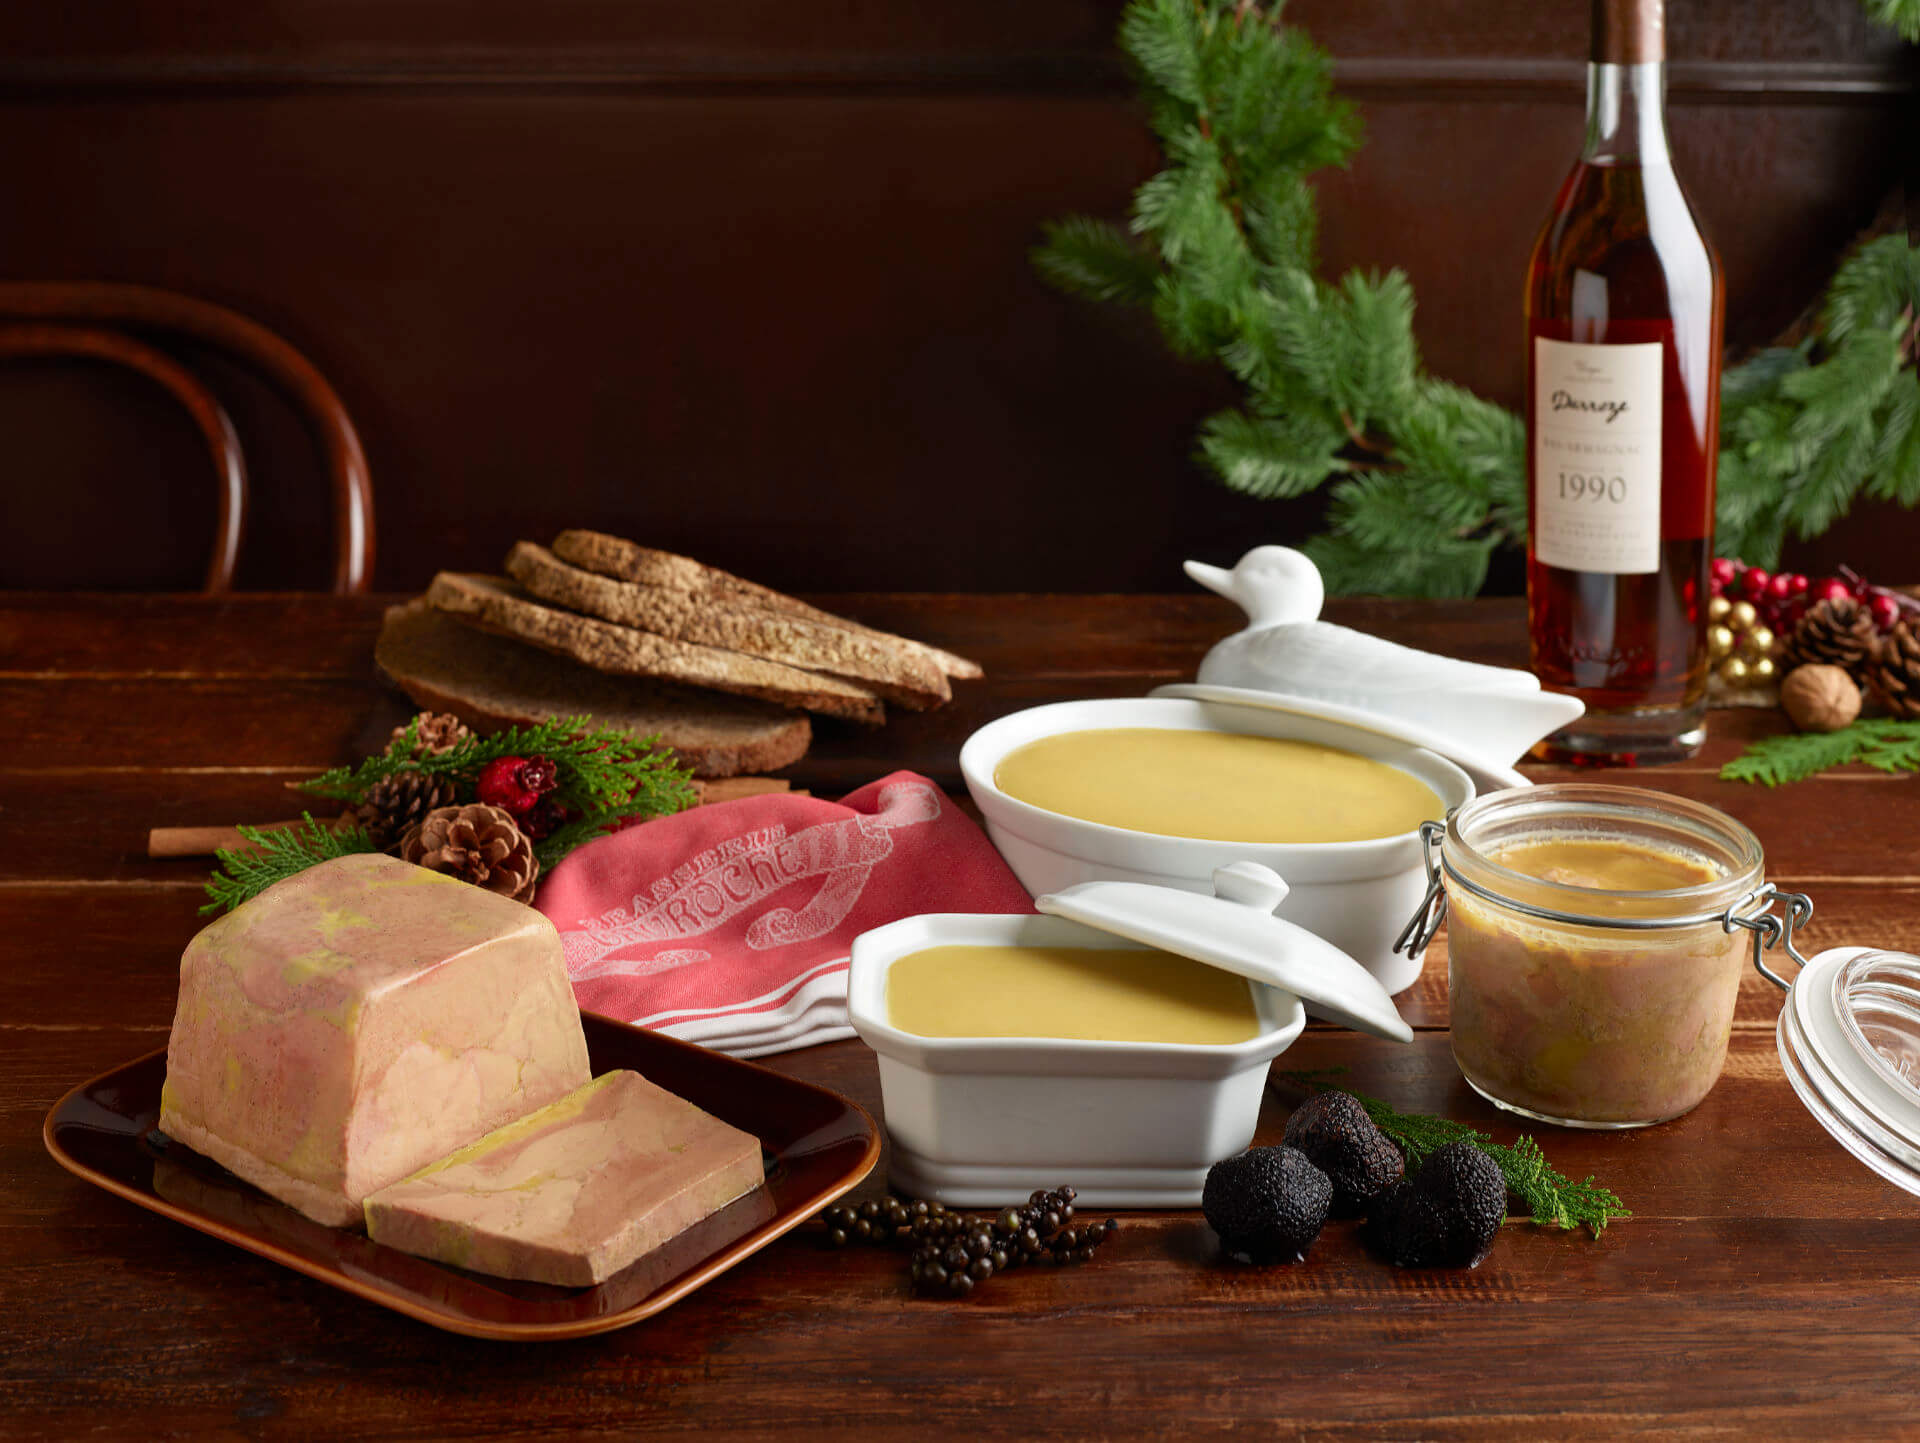 Bringing you a touch of French Gastronomy this Christmas!